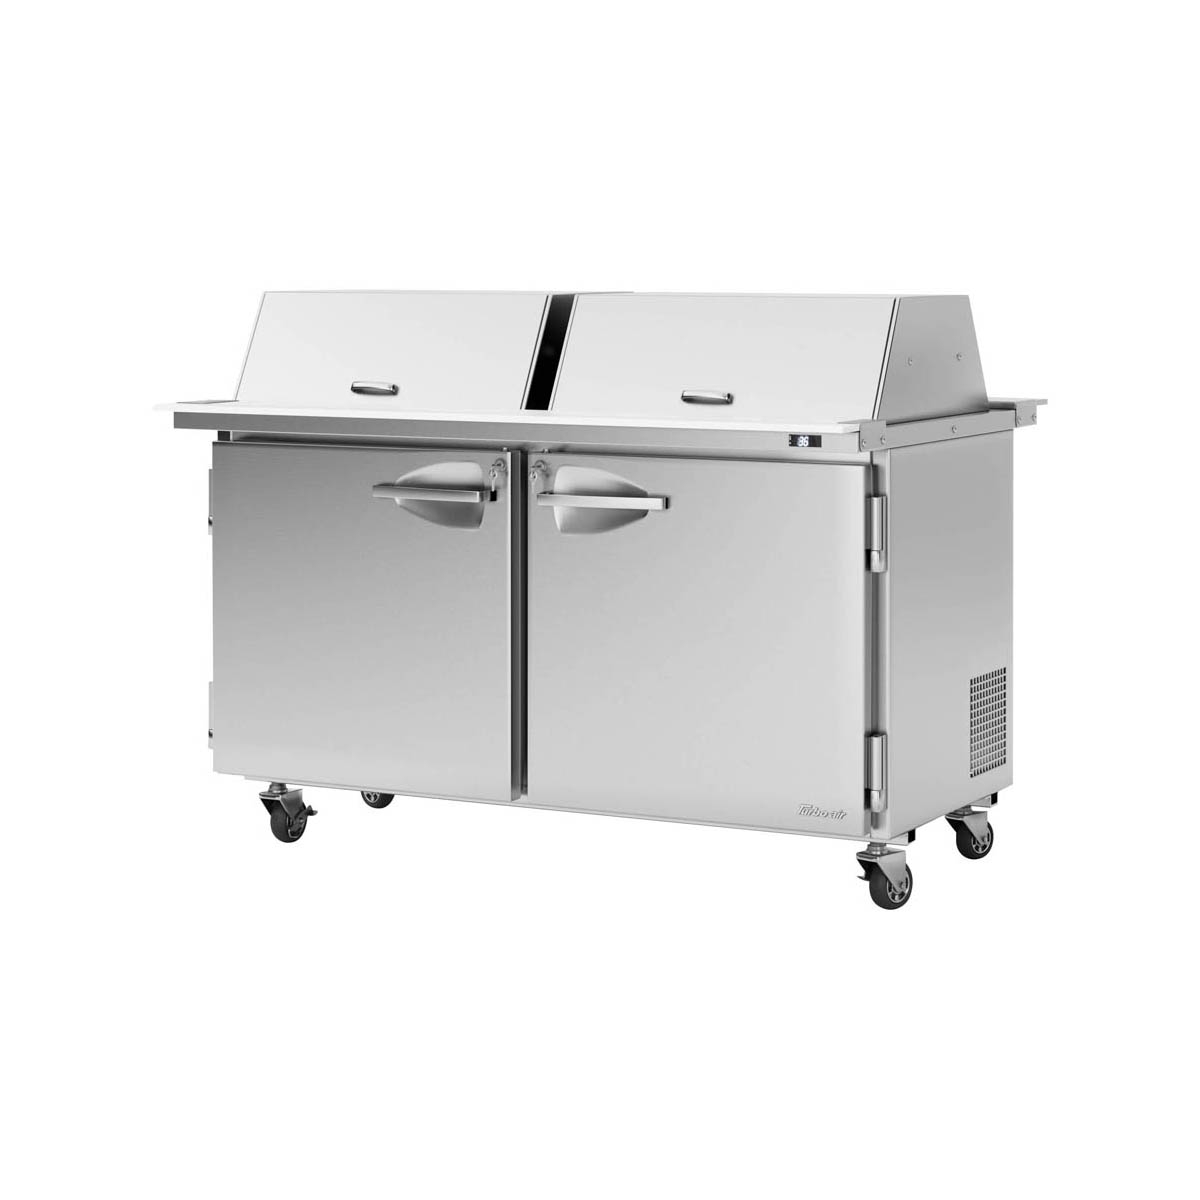 Turbo Air PST-60-24-N-DS 60″ Two Section Mega Top Sandwich Prep Table, 24 Pan